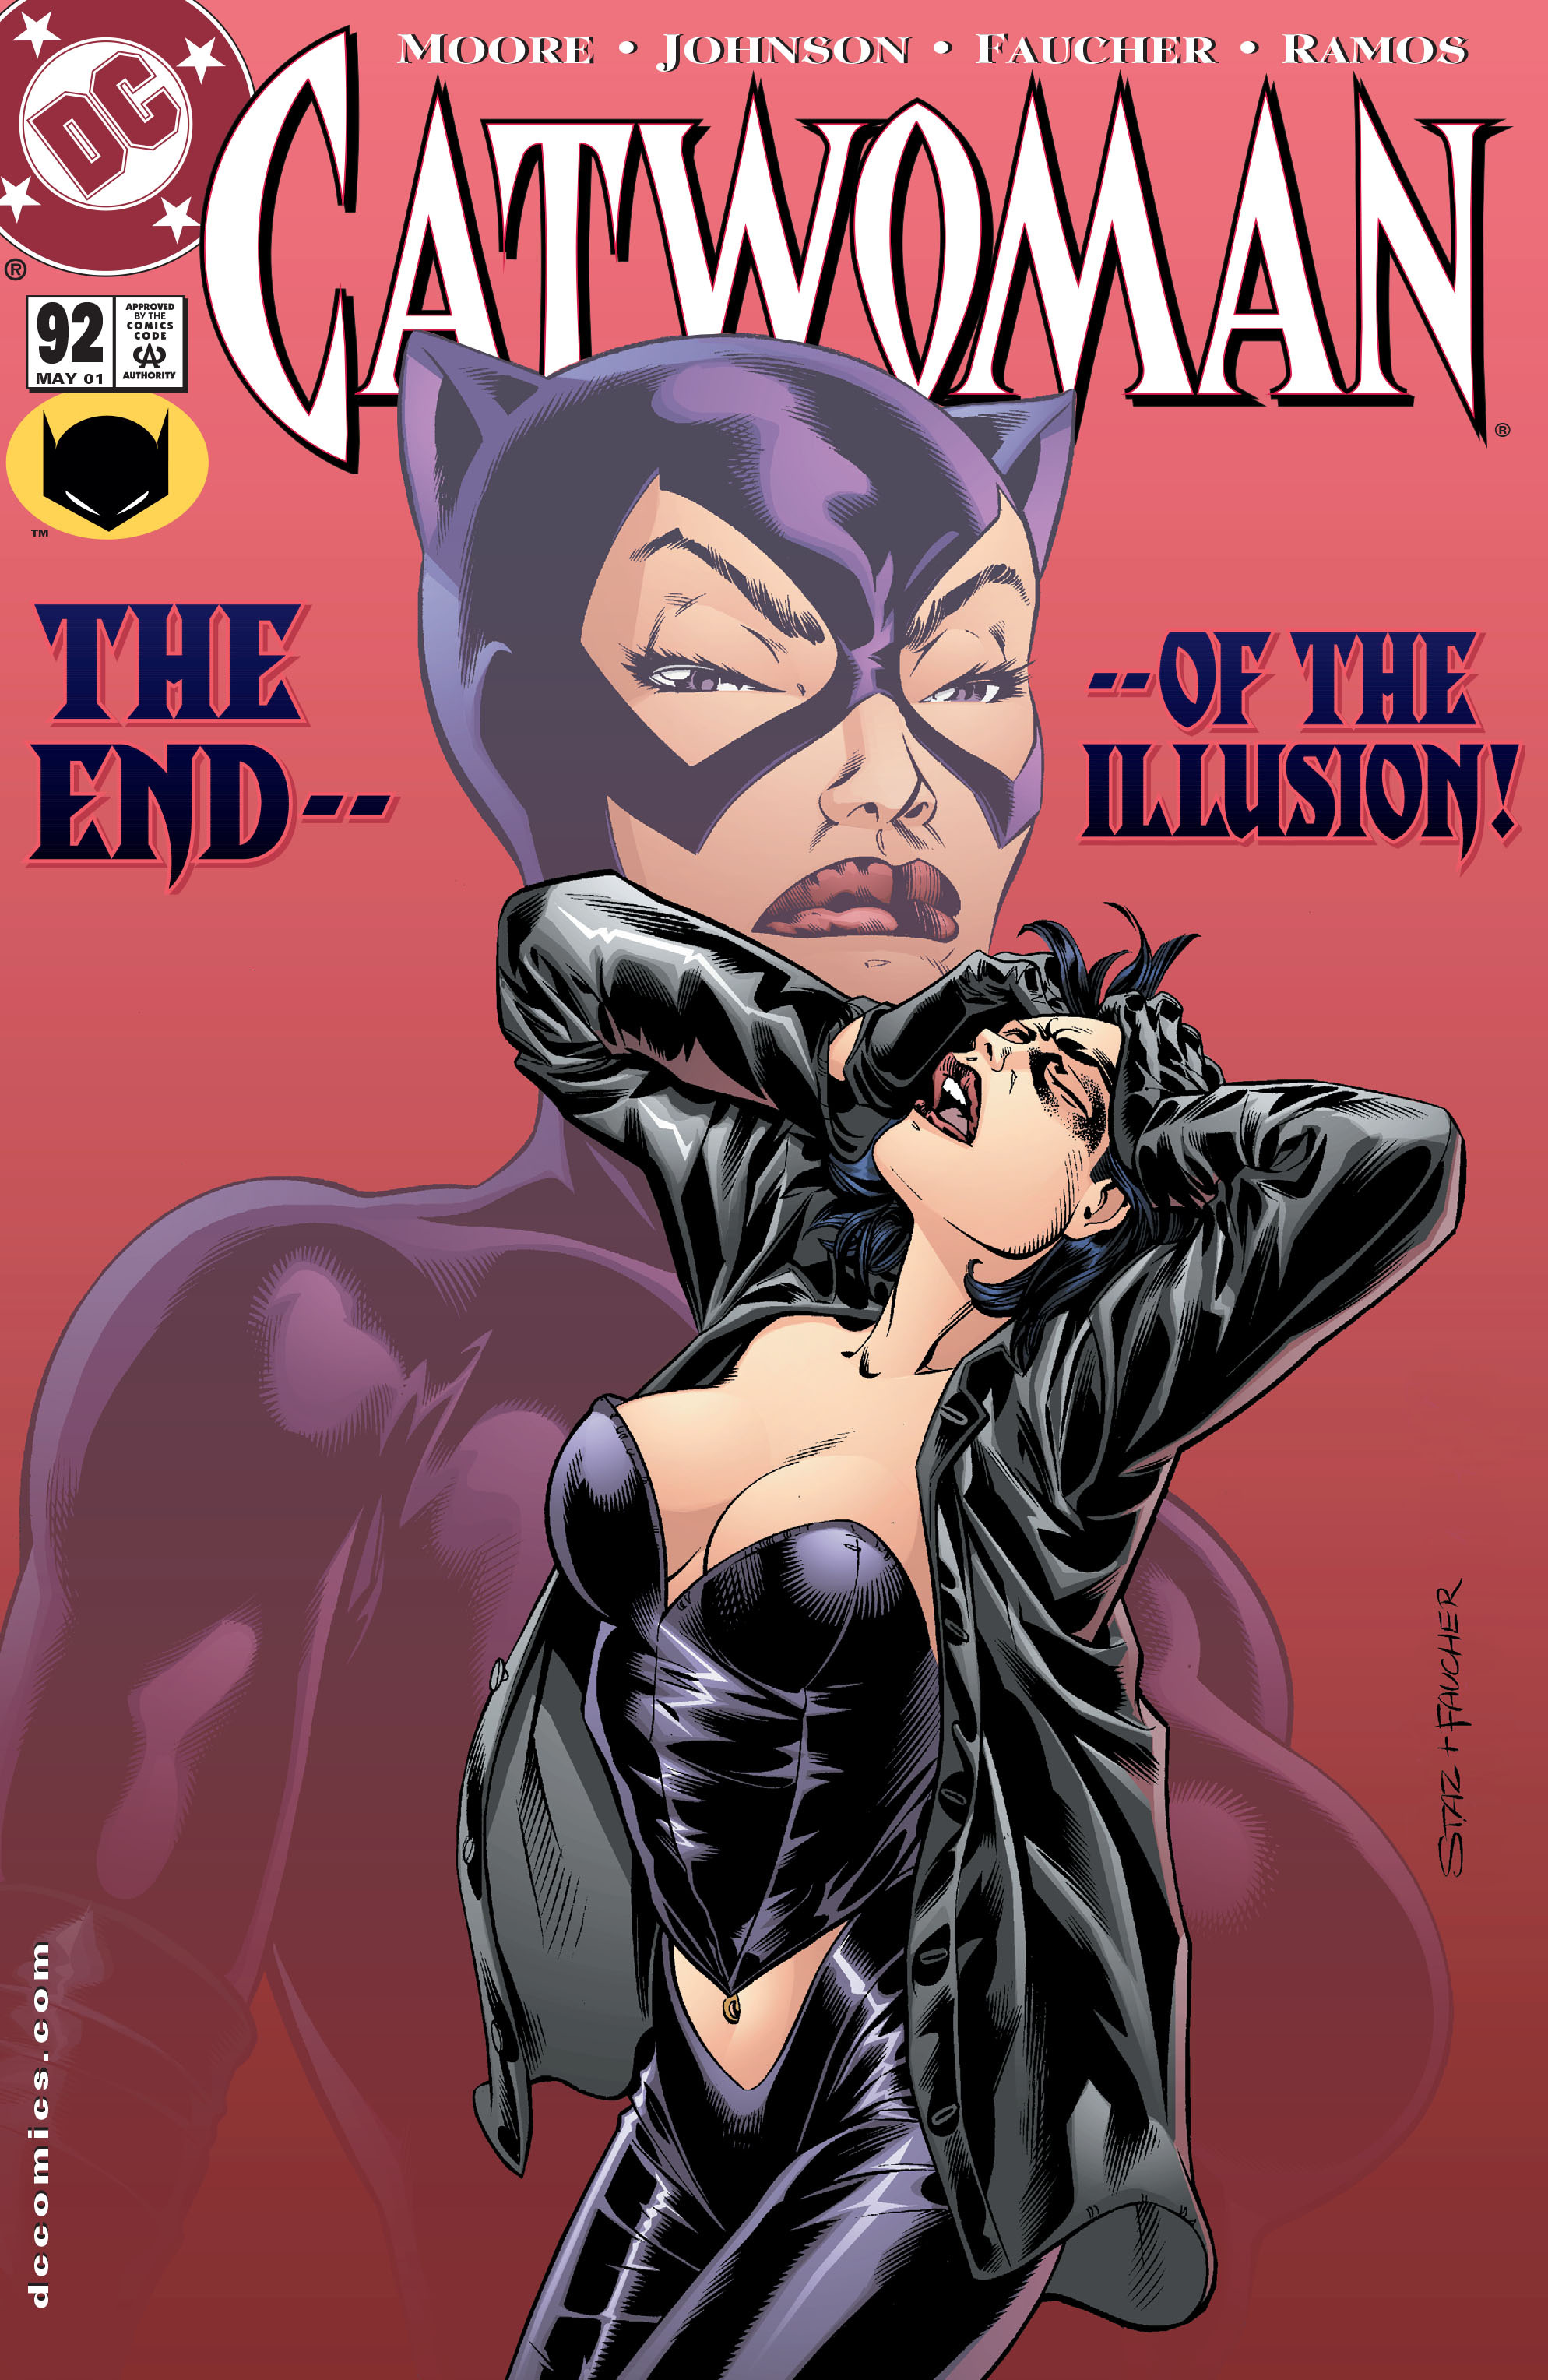 Catwoman (1993) Issue #92 #97 - English 1